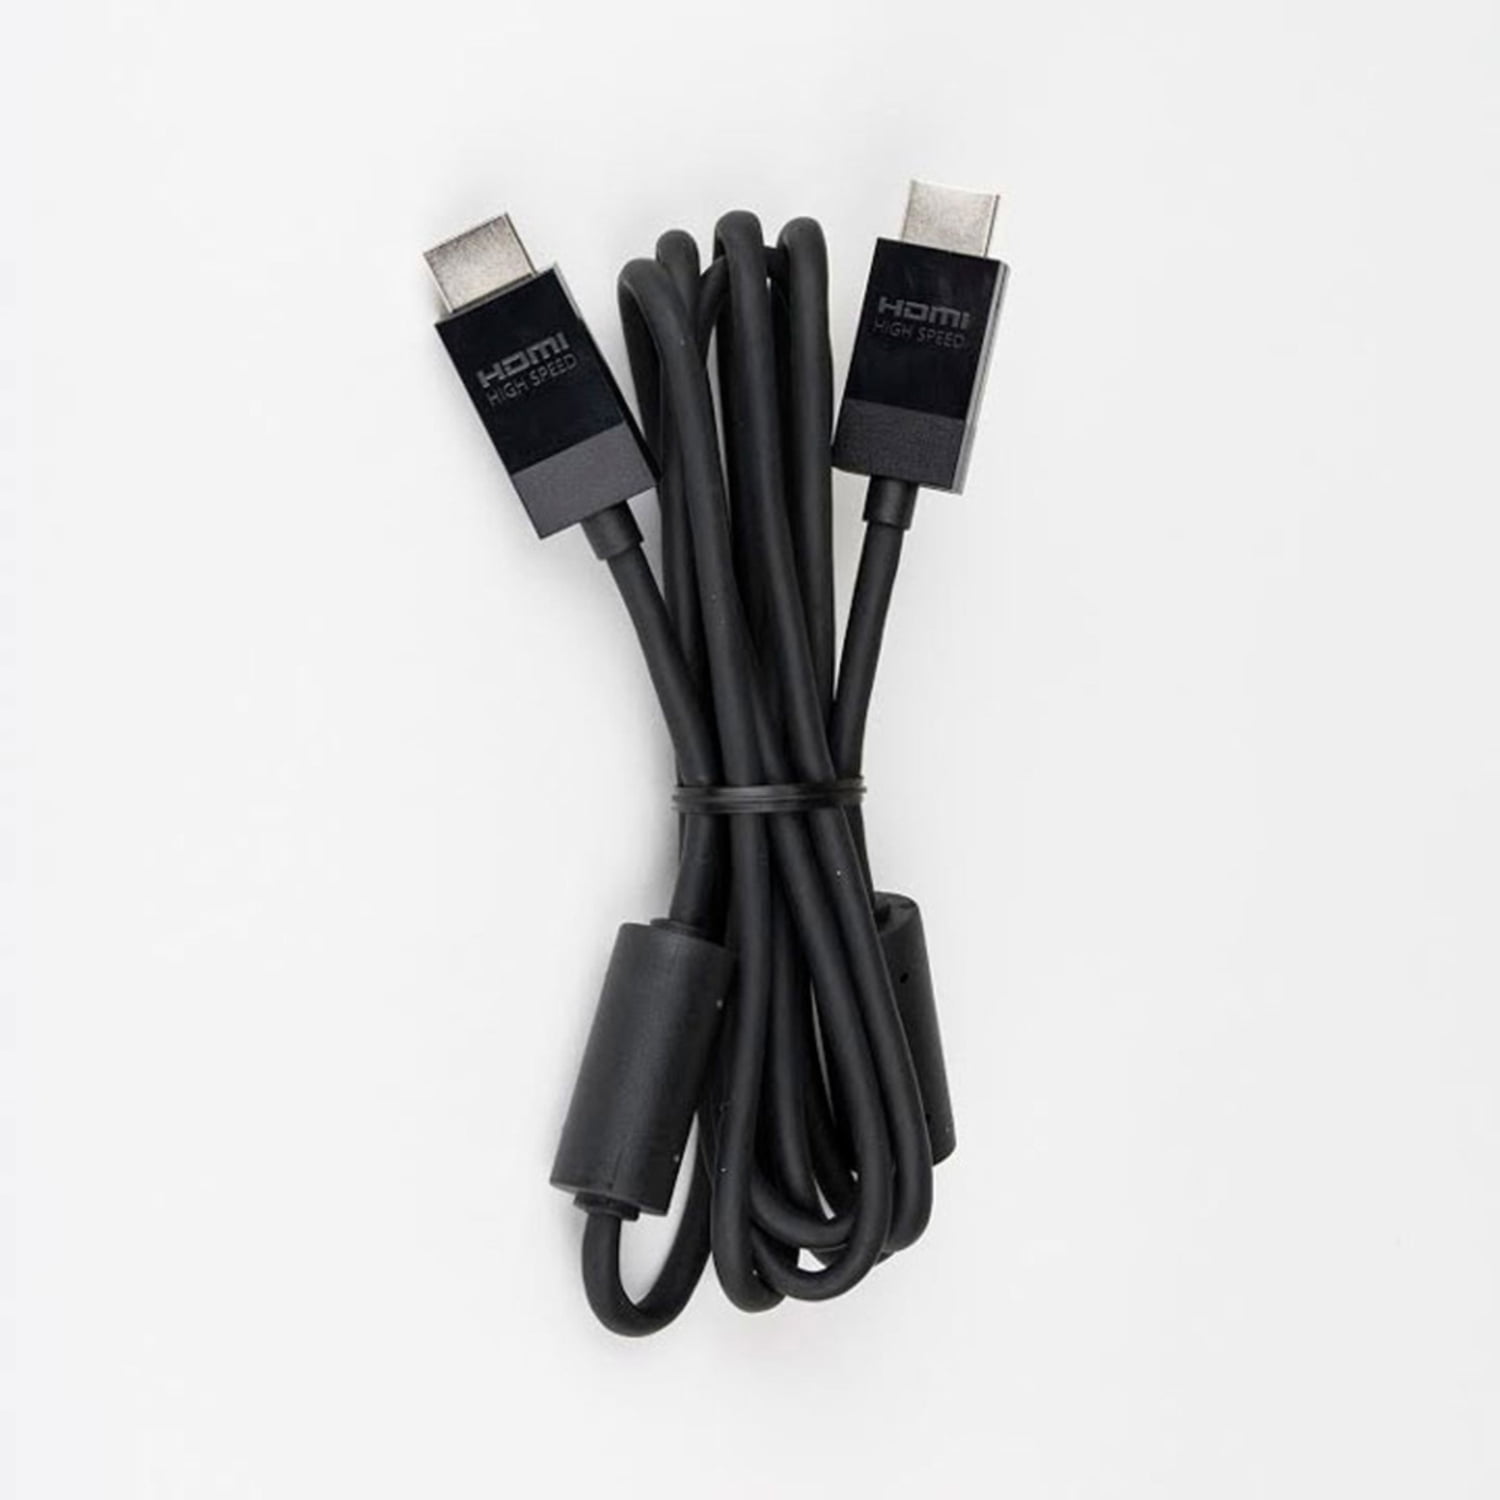 Speed HDMI Cable For Xbox Console, - Walmart.com